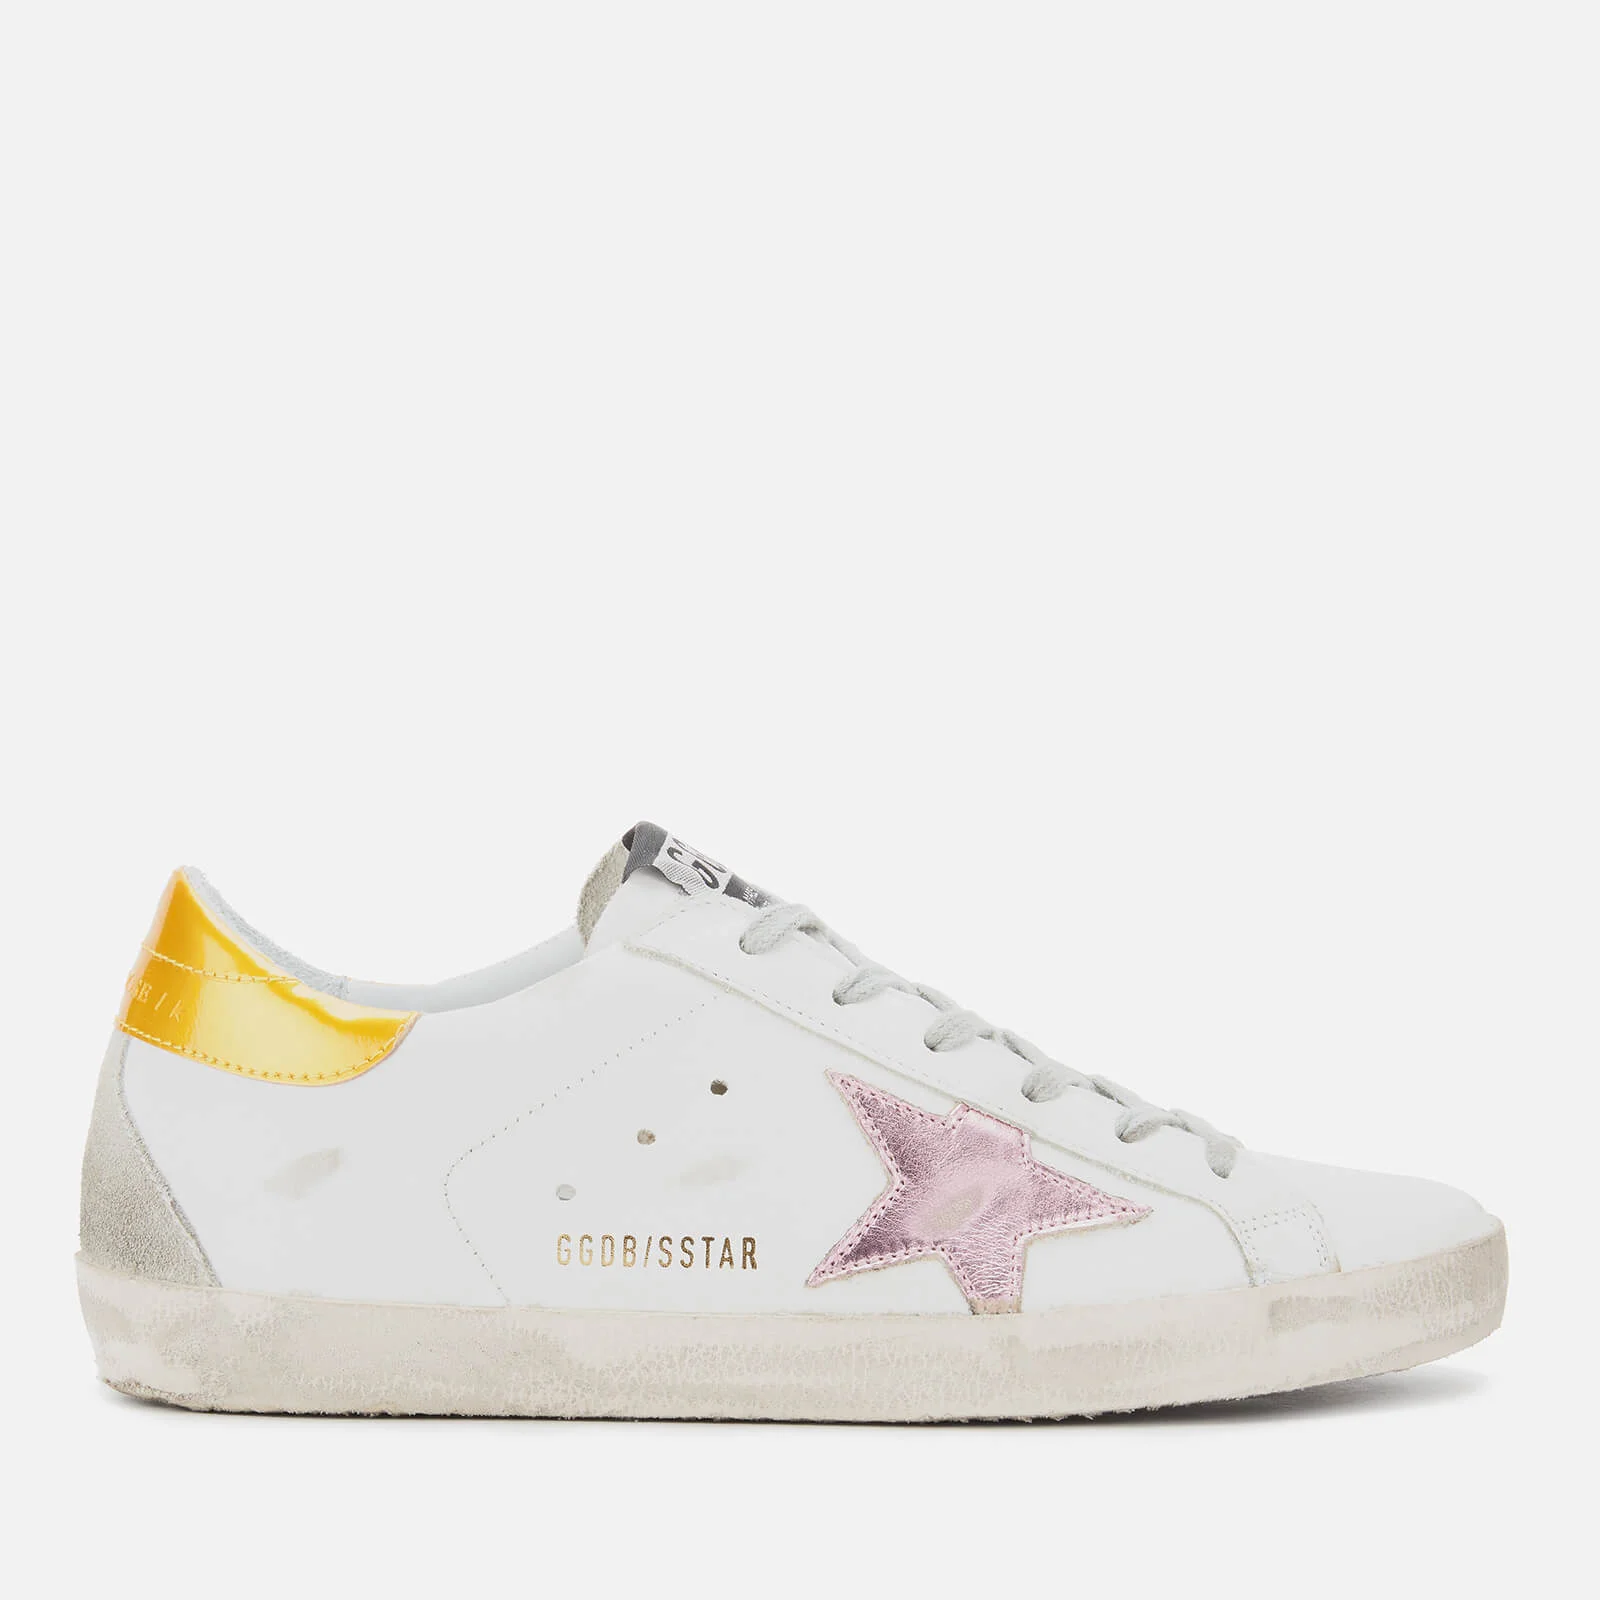 Golden Goose Women's Superstar Trainers - White Leather/Gold Pink Metallic Star Image 1